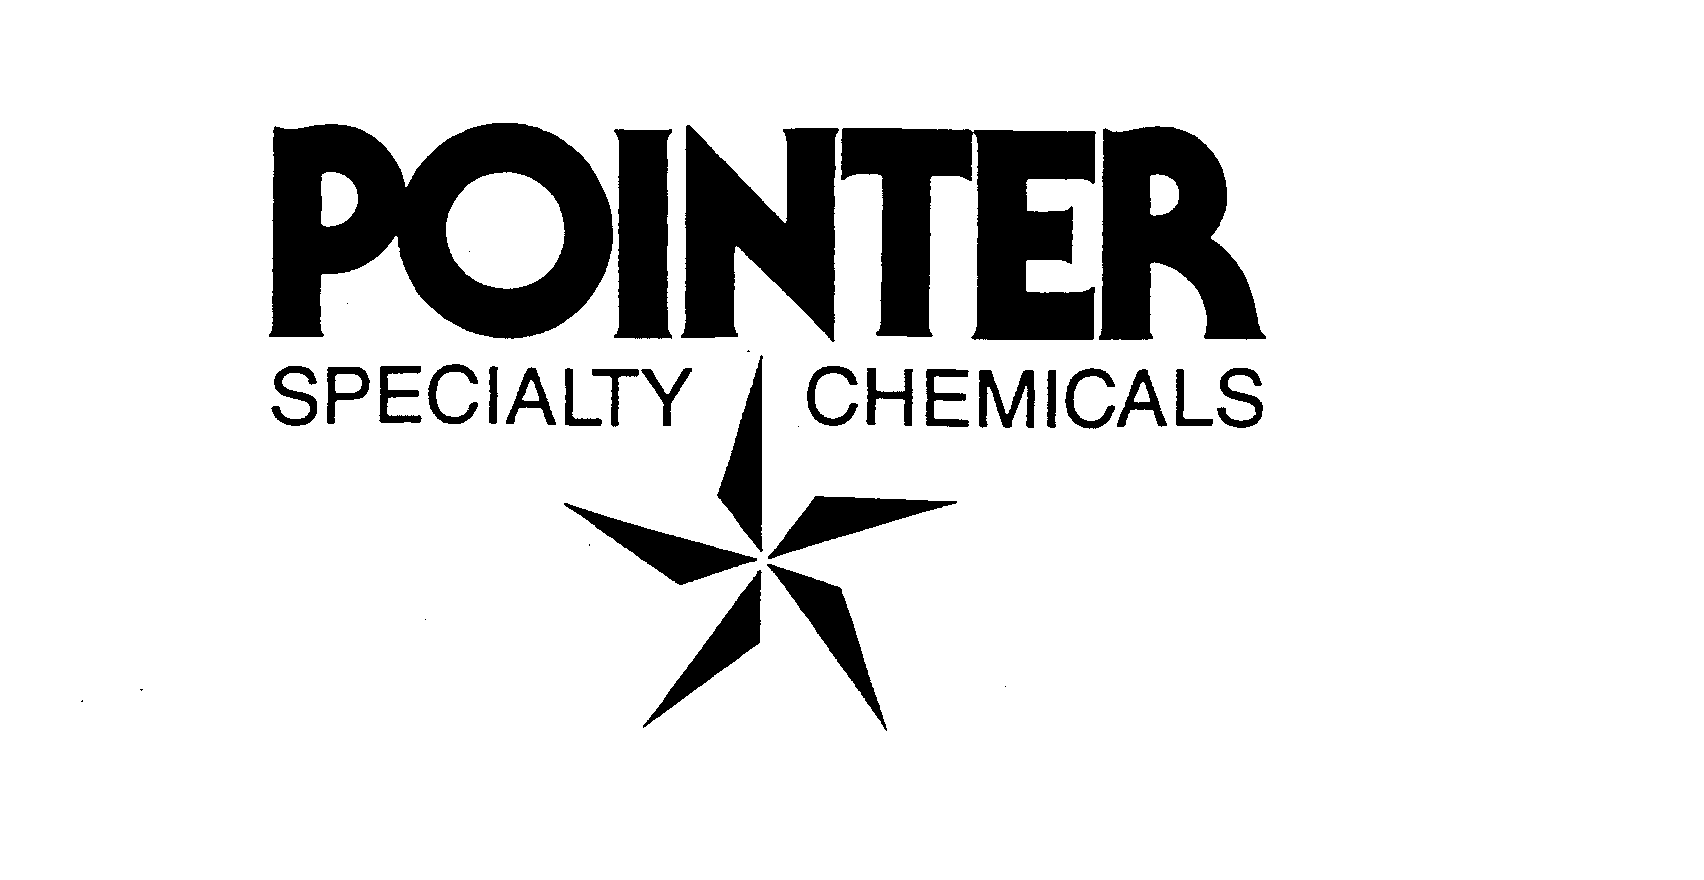  POINTER SPECIALTY CHEMICALS